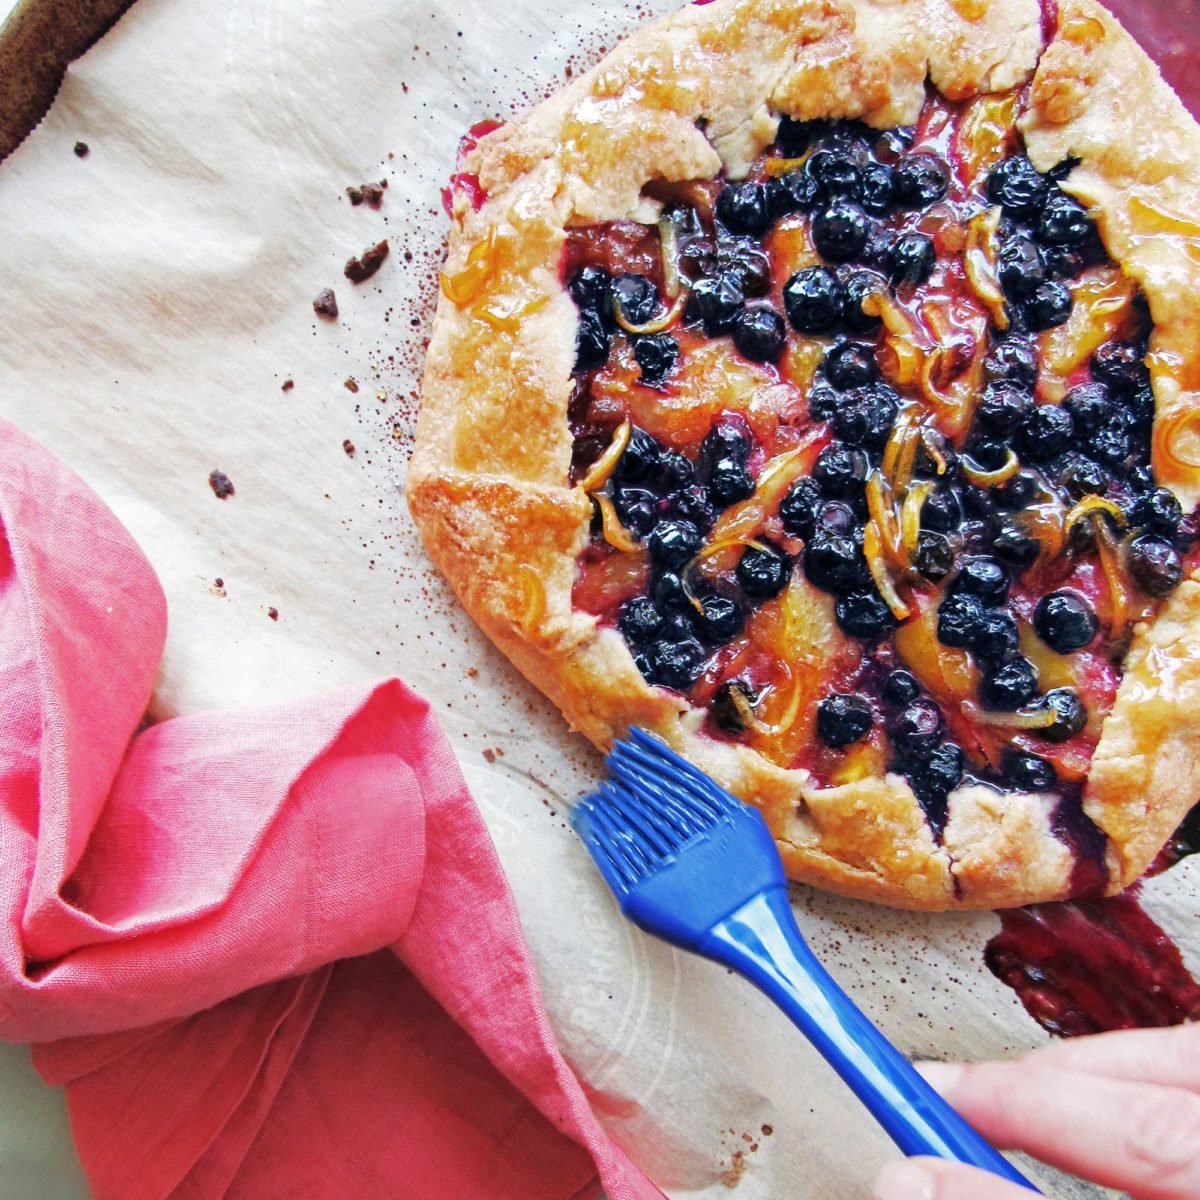 Brush the cooked galette with preserves and cool.